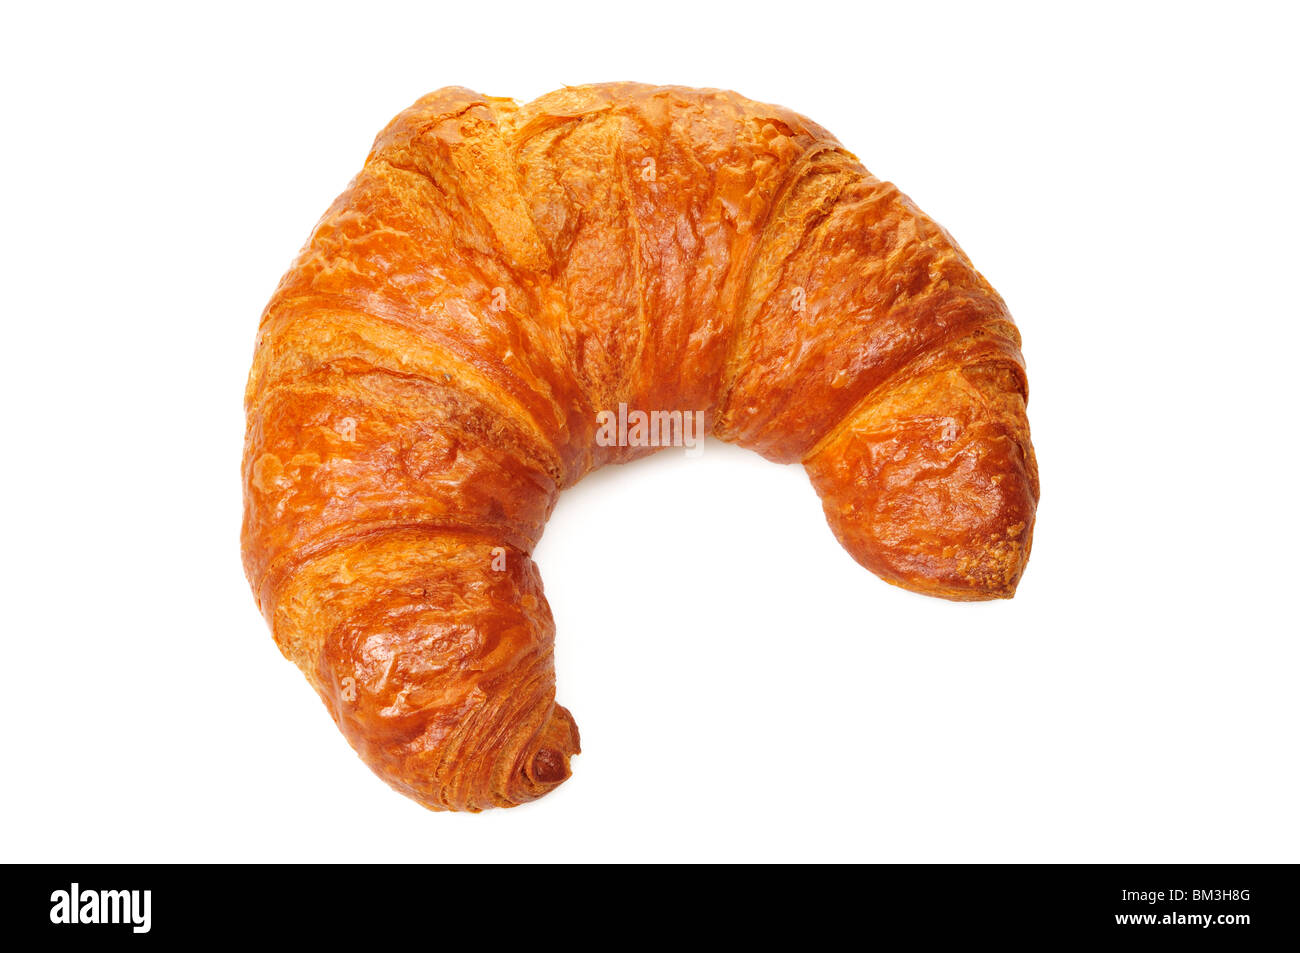 One Croissant isolated on white Stock Photo